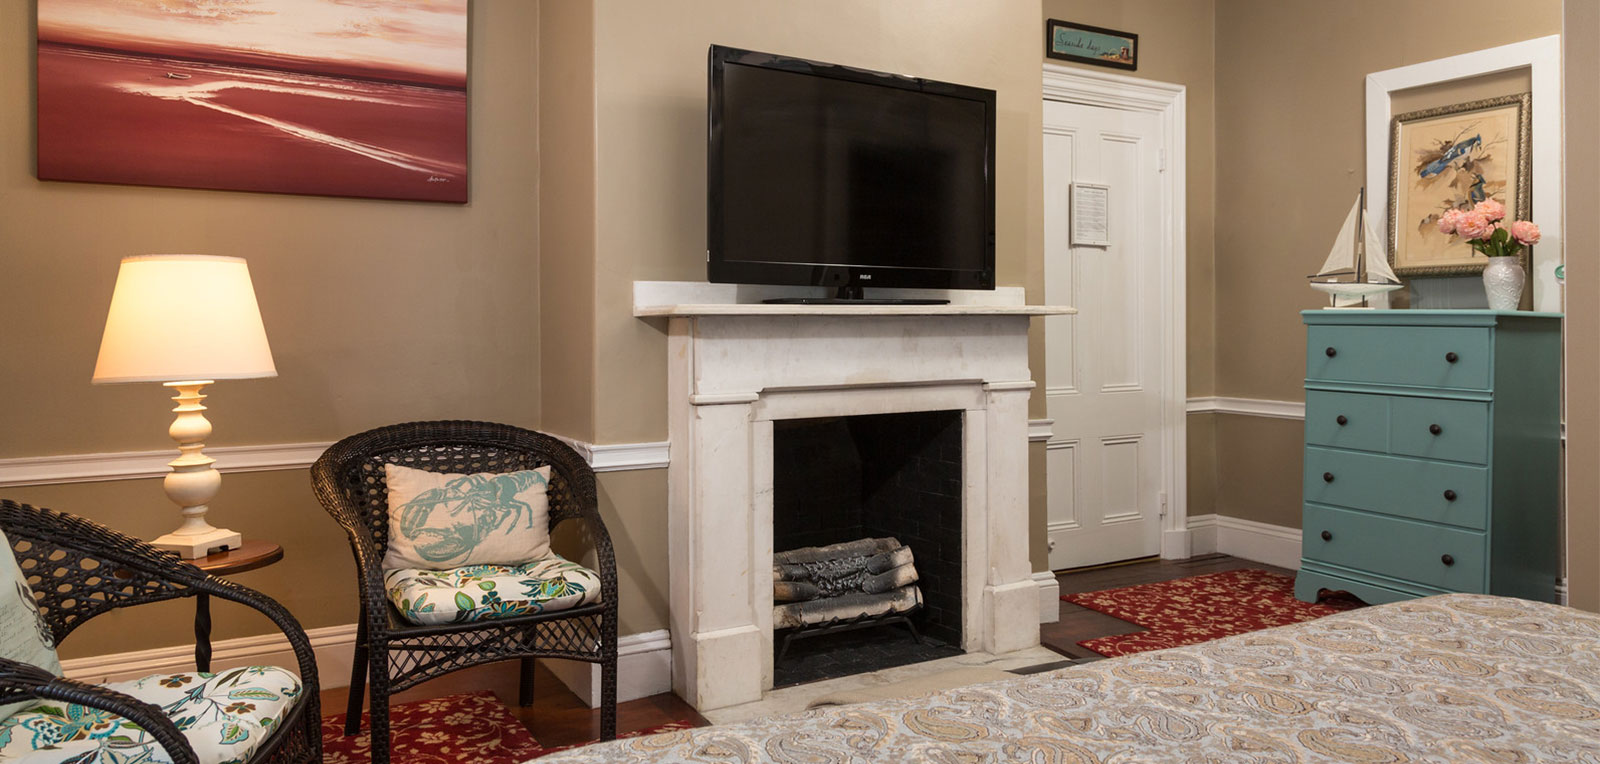 King Private Bath TV, Fireplace and Paintings | ADMIRAL SIMS B&B, Newport Rhode Island